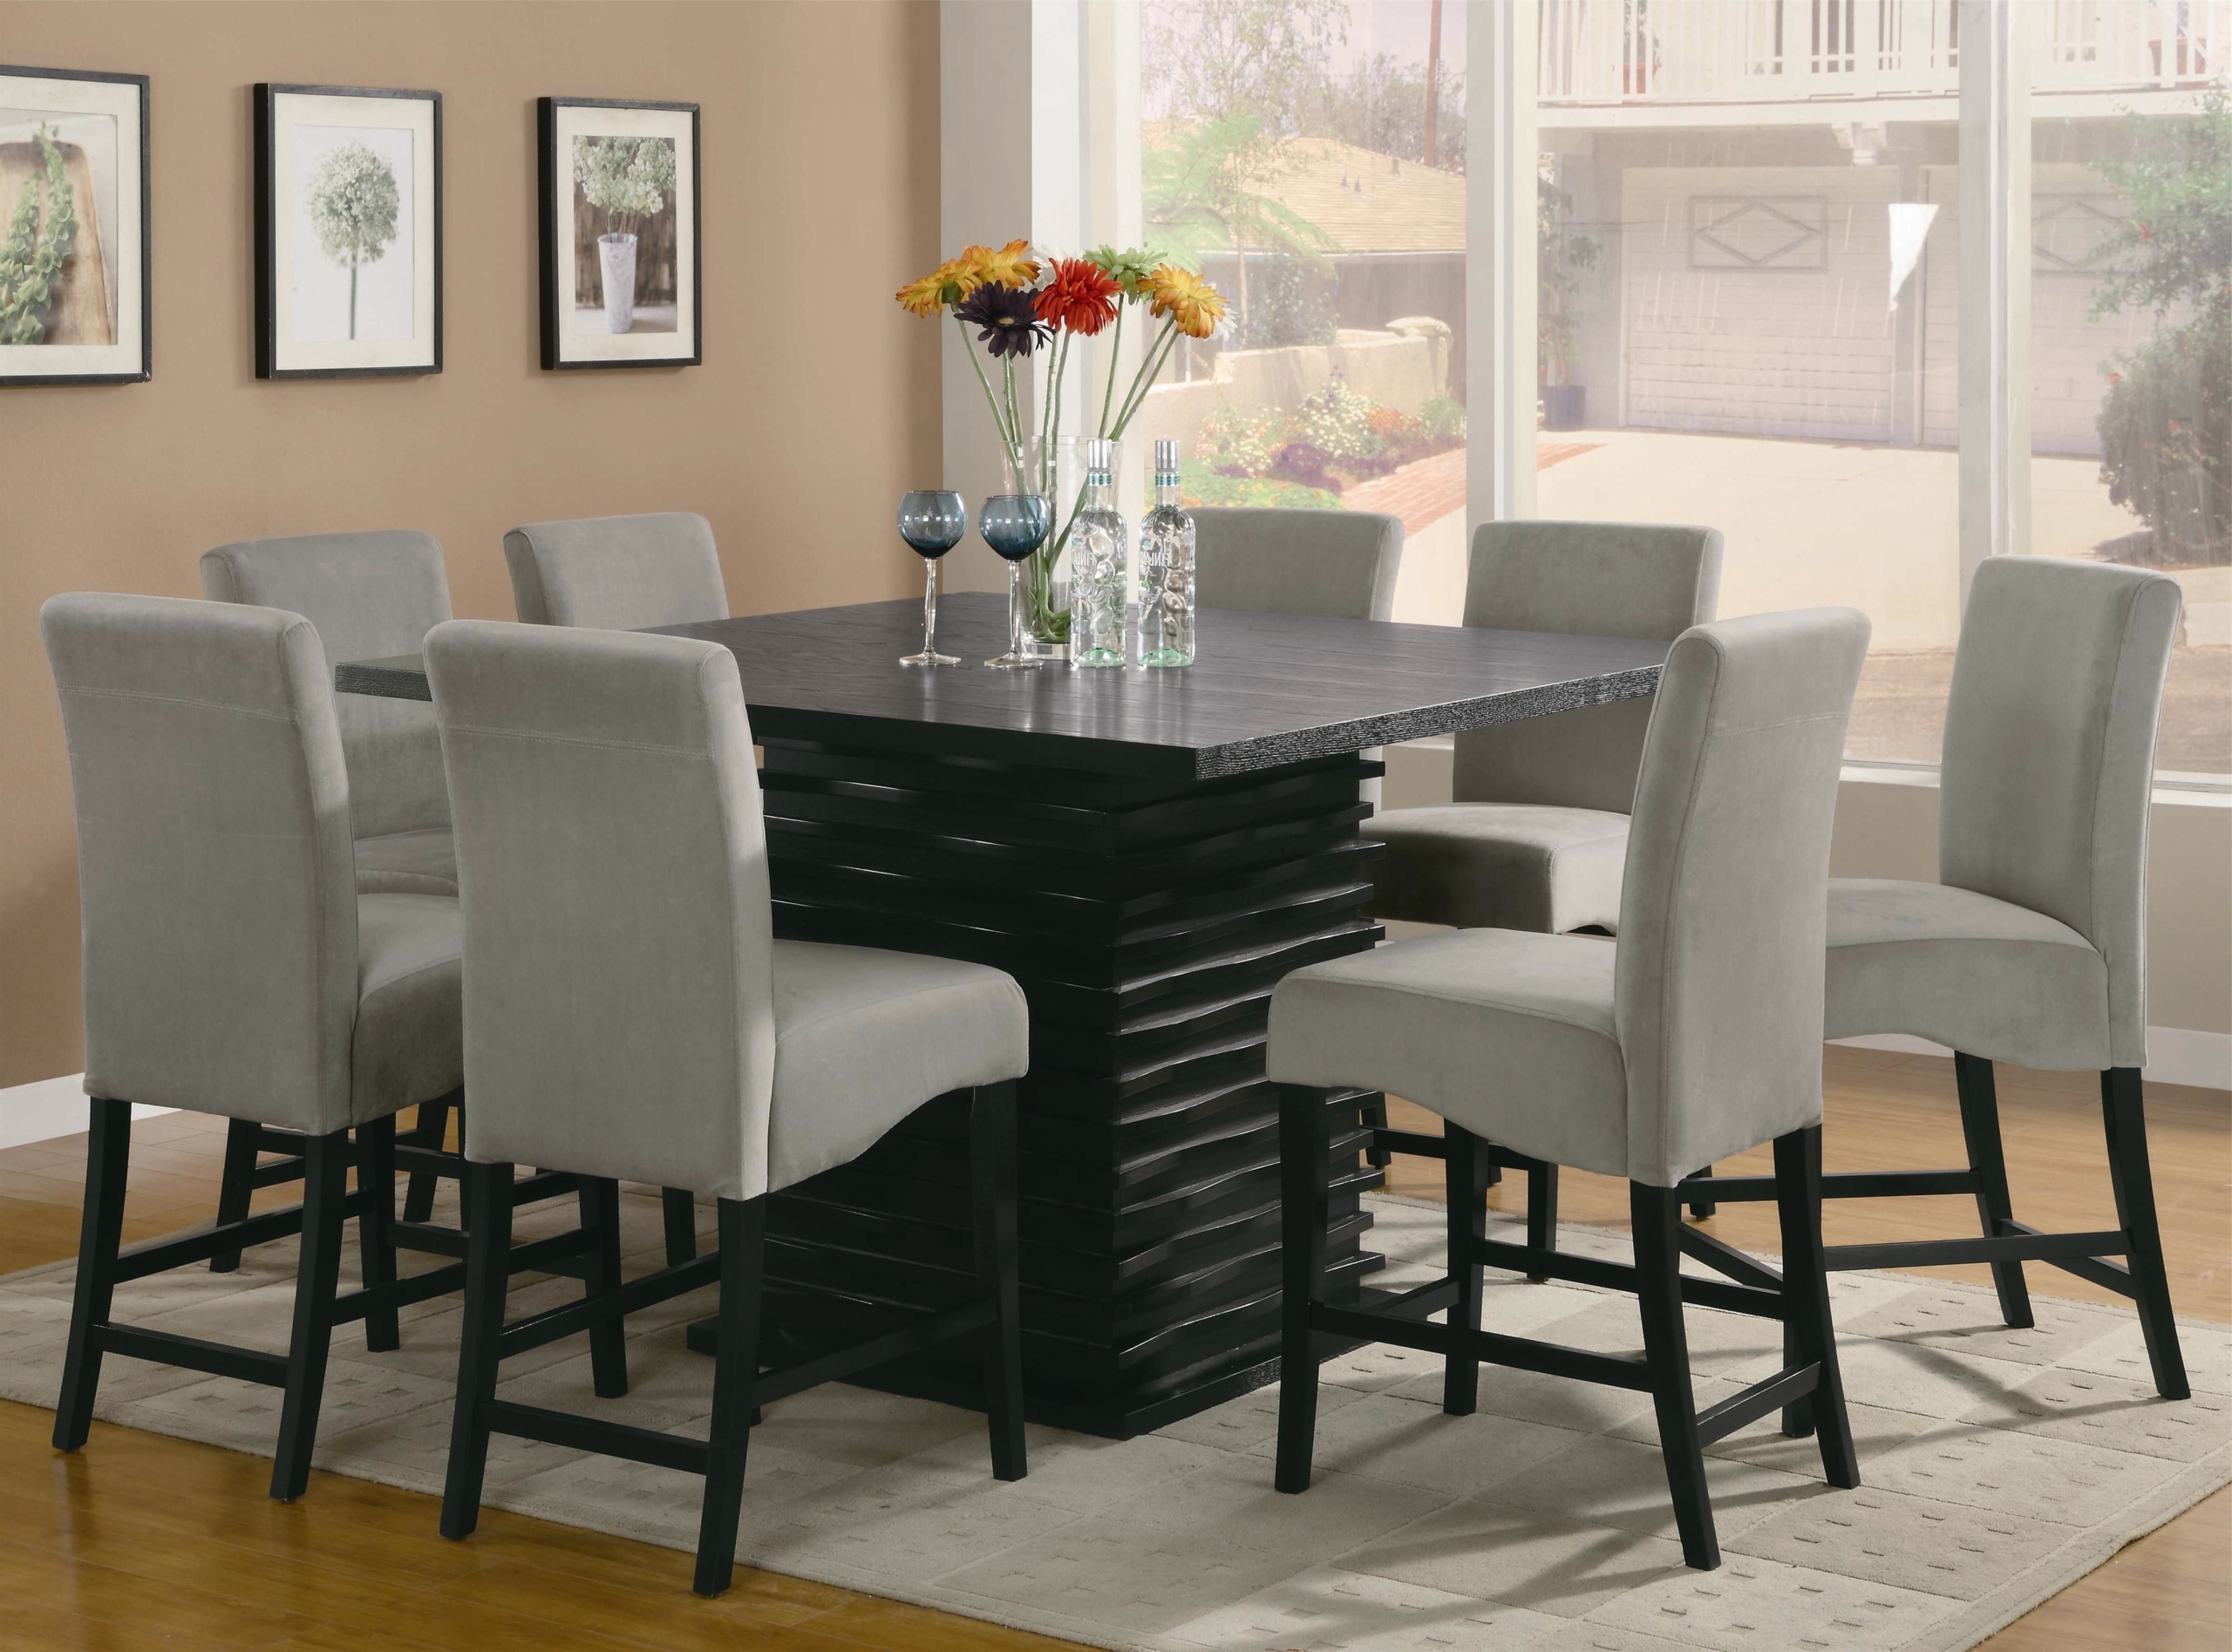 Counter height table with 8 chairs